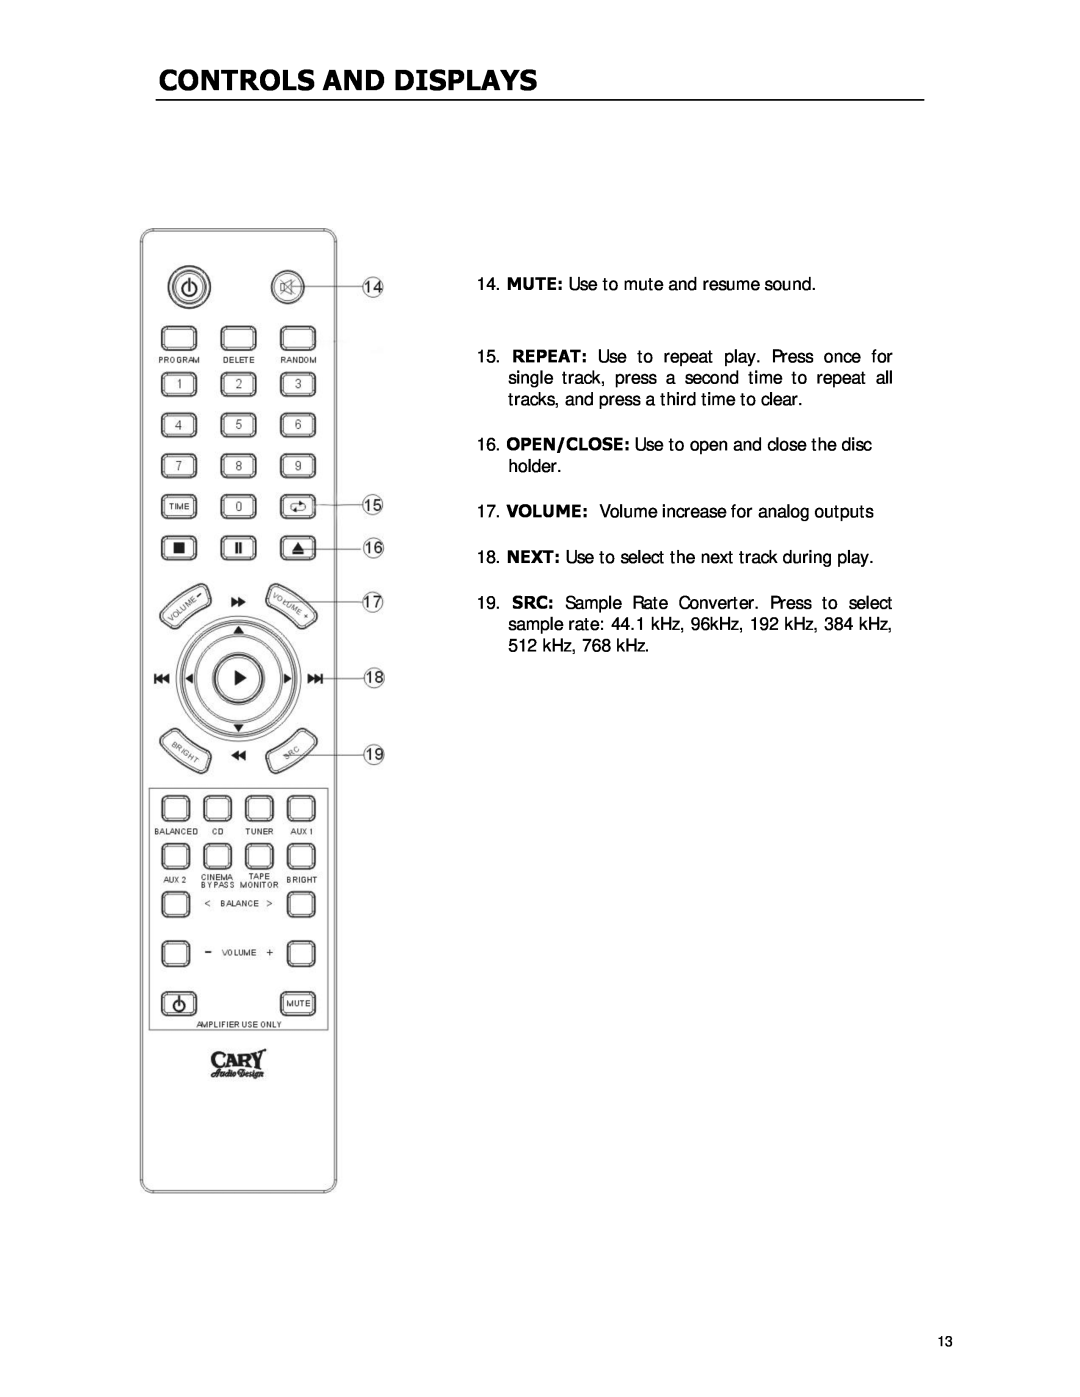 Cary Audio Design CD-500 owner manual Controls And Displays, MUTE Use to mute and resume sound 